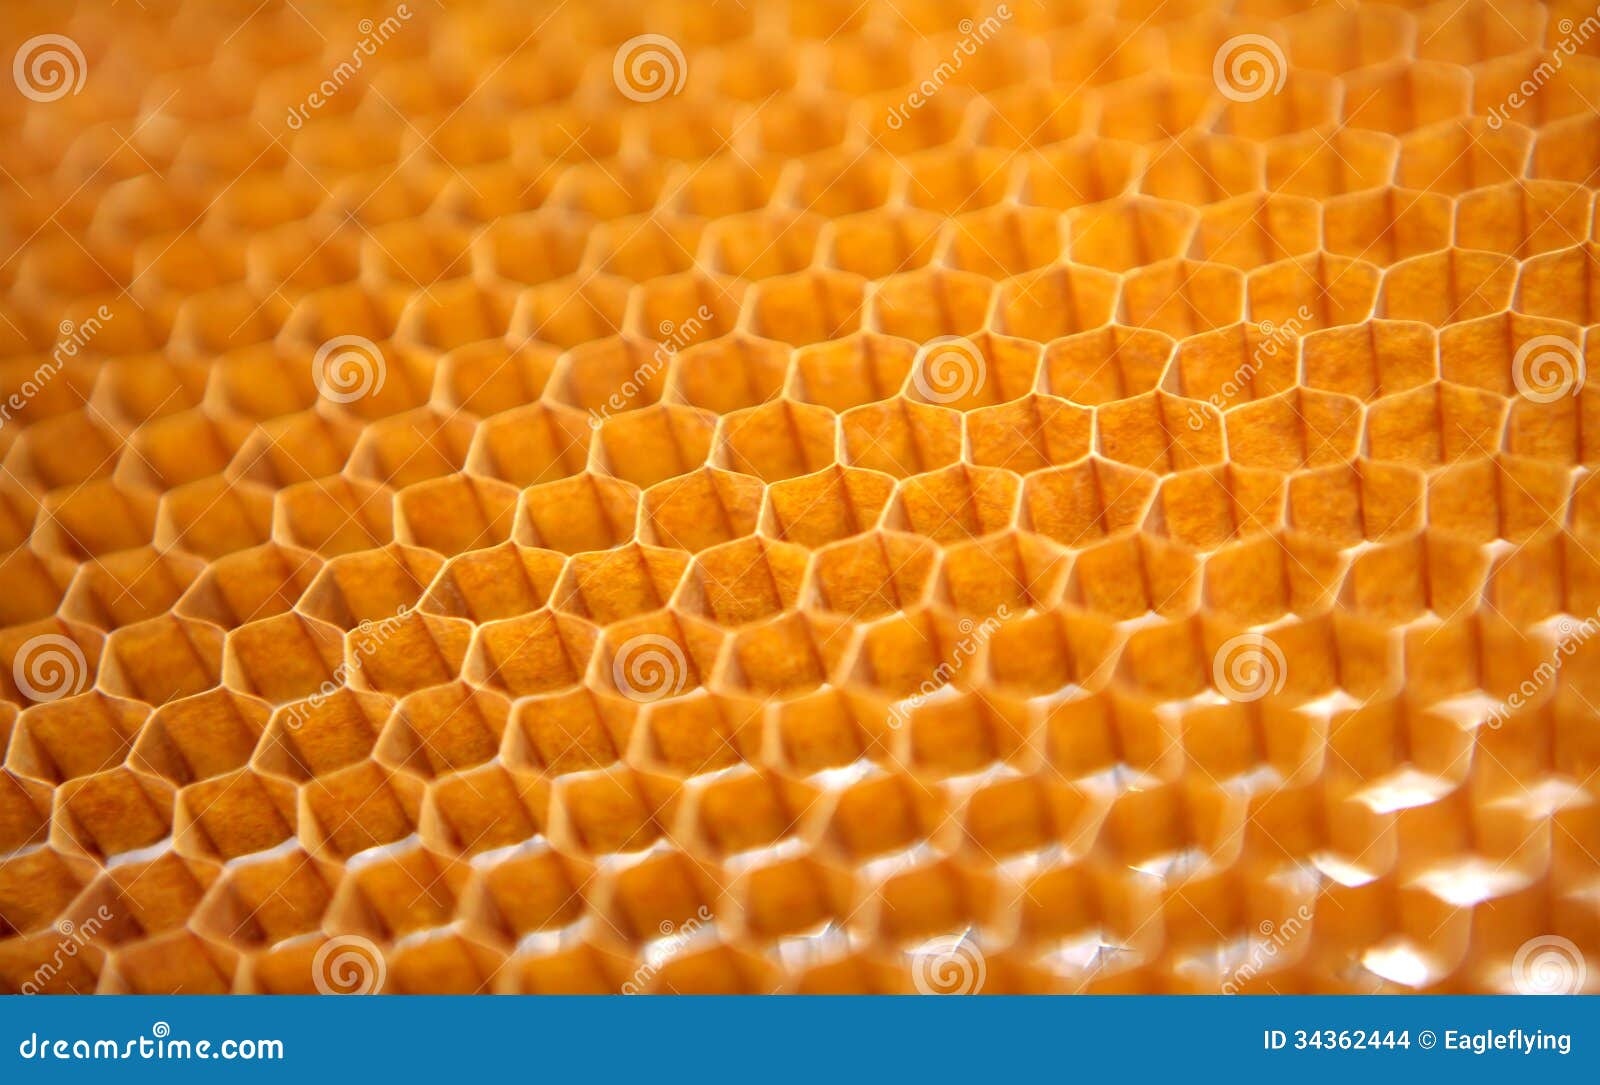 honeycomb structure for aerospace industry